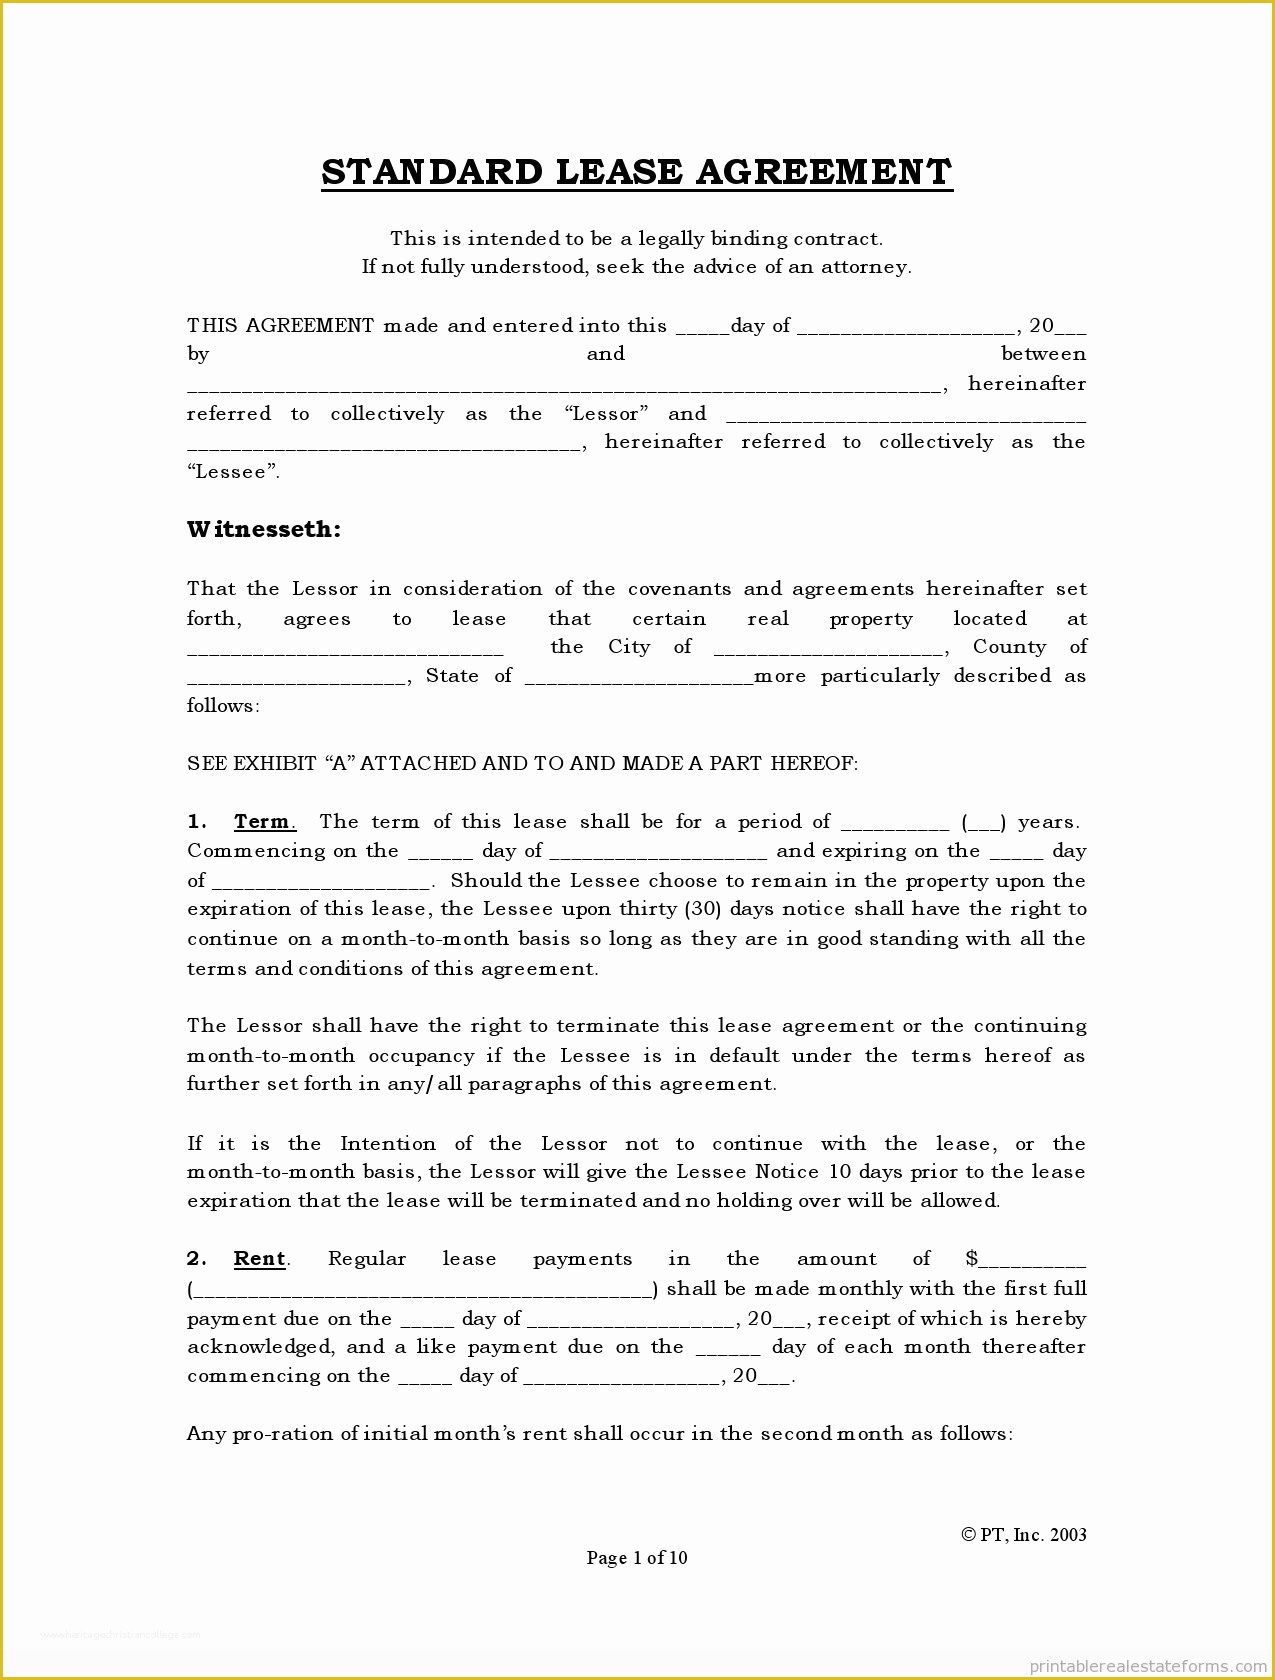 Free Florida Lease Agreement Template Of Free Rental Agreements to Print